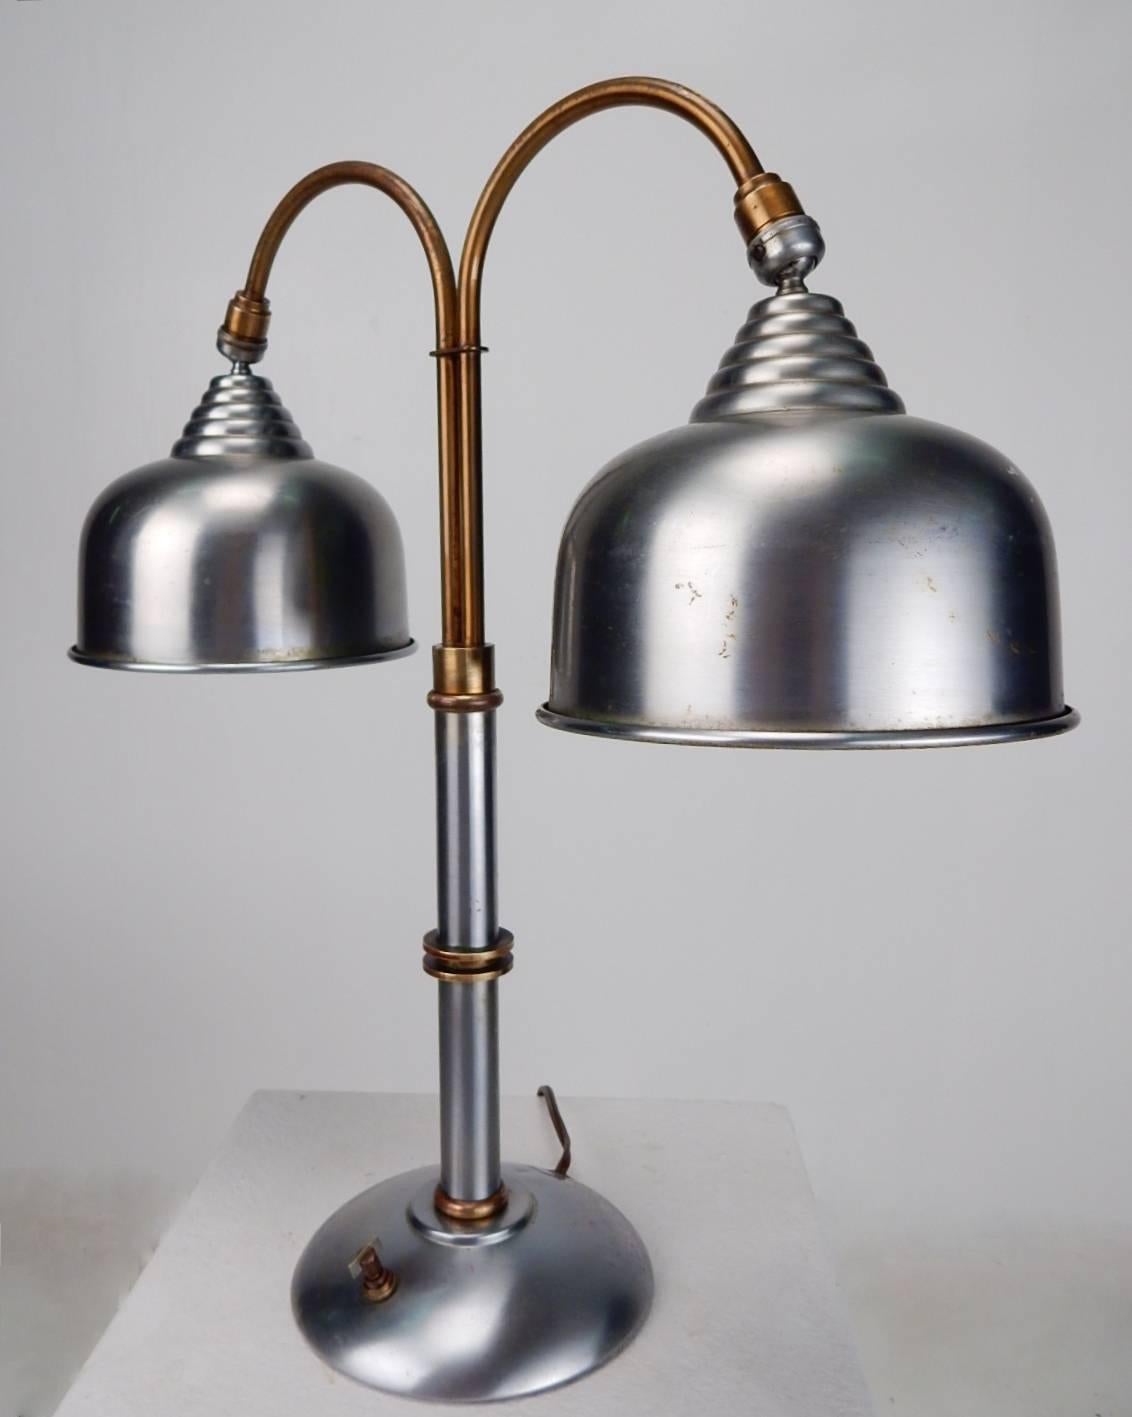 1930s Faries Lamp CO. Desk lamp.
Double shade swivel heads. Two-tone brass/brushed steel body.
Each shade takes a standard 60 watt bulb.
It is in perfect working order with it's original three-way propeller switch.
Marked Faries Decatur, ILL